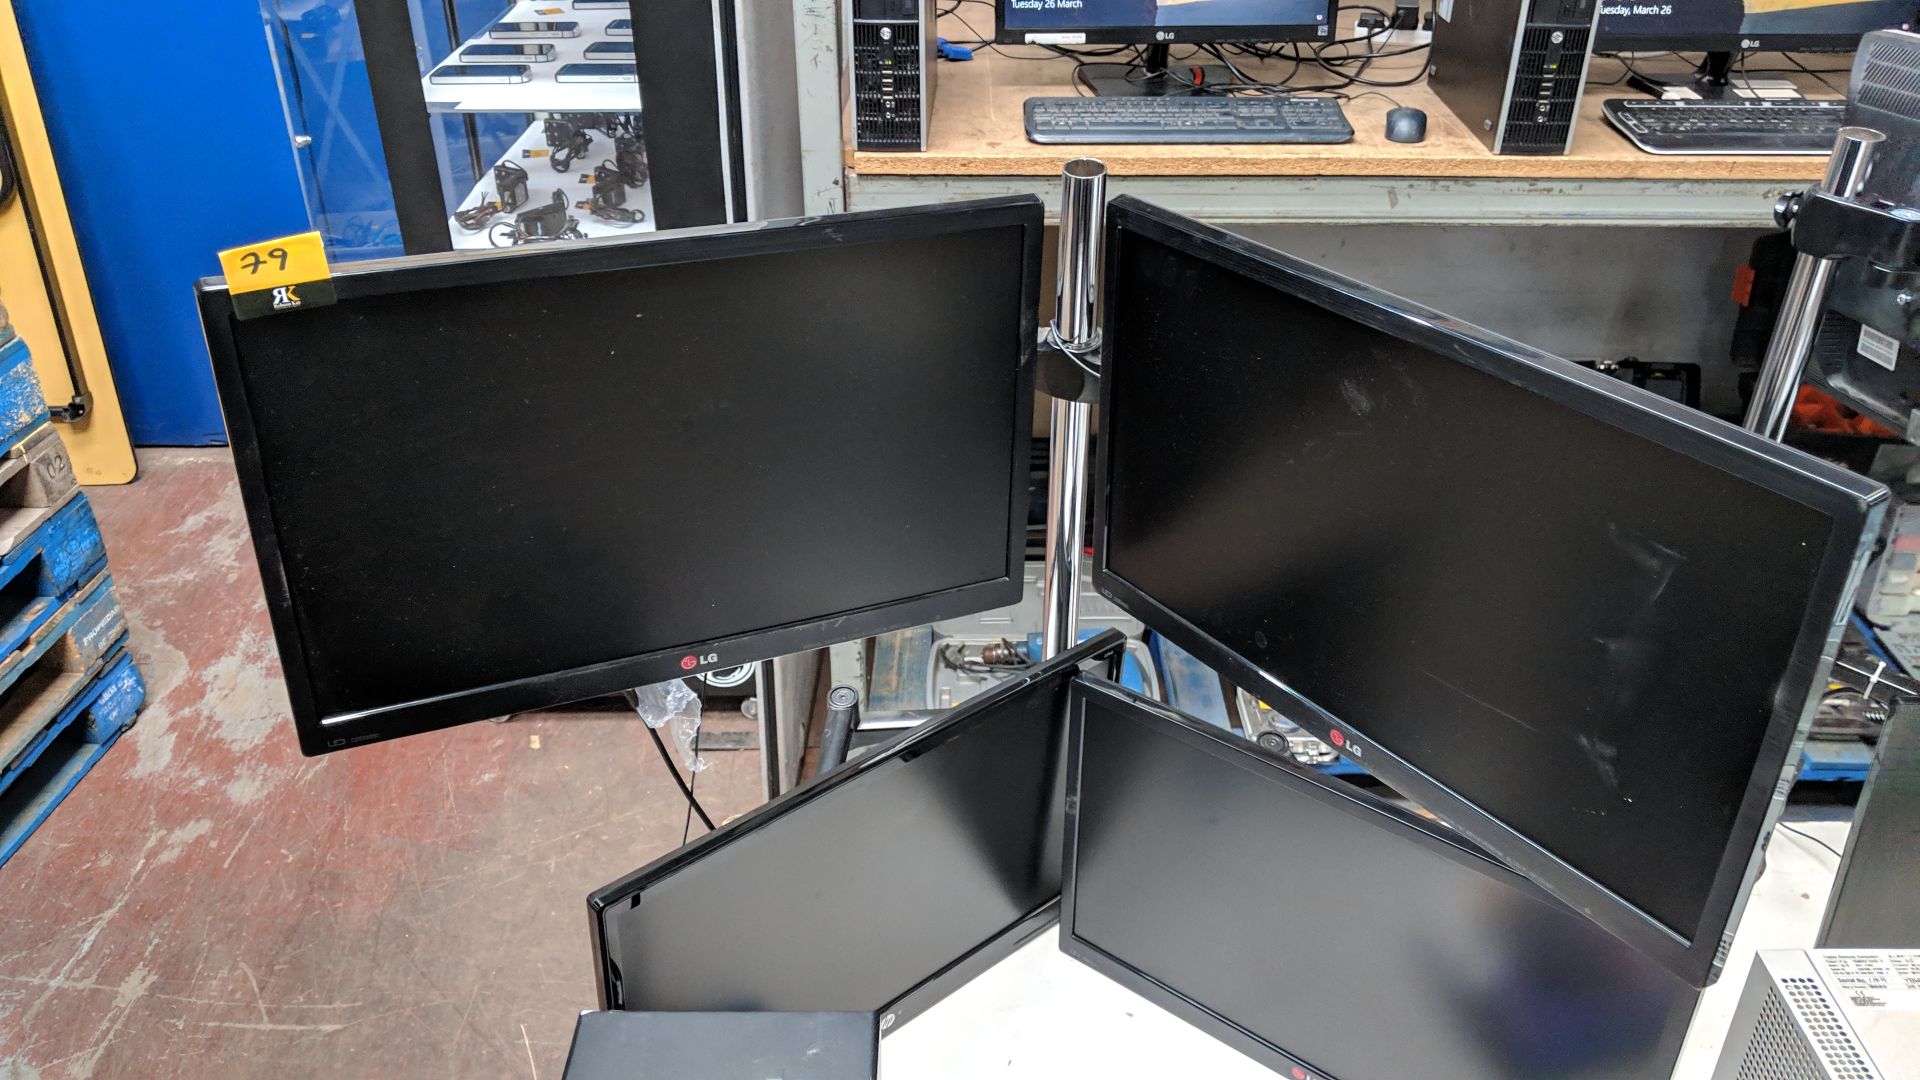 Quad monitor system comprising desk clamp/stand & 4 off assorted 22" widescreen monitors